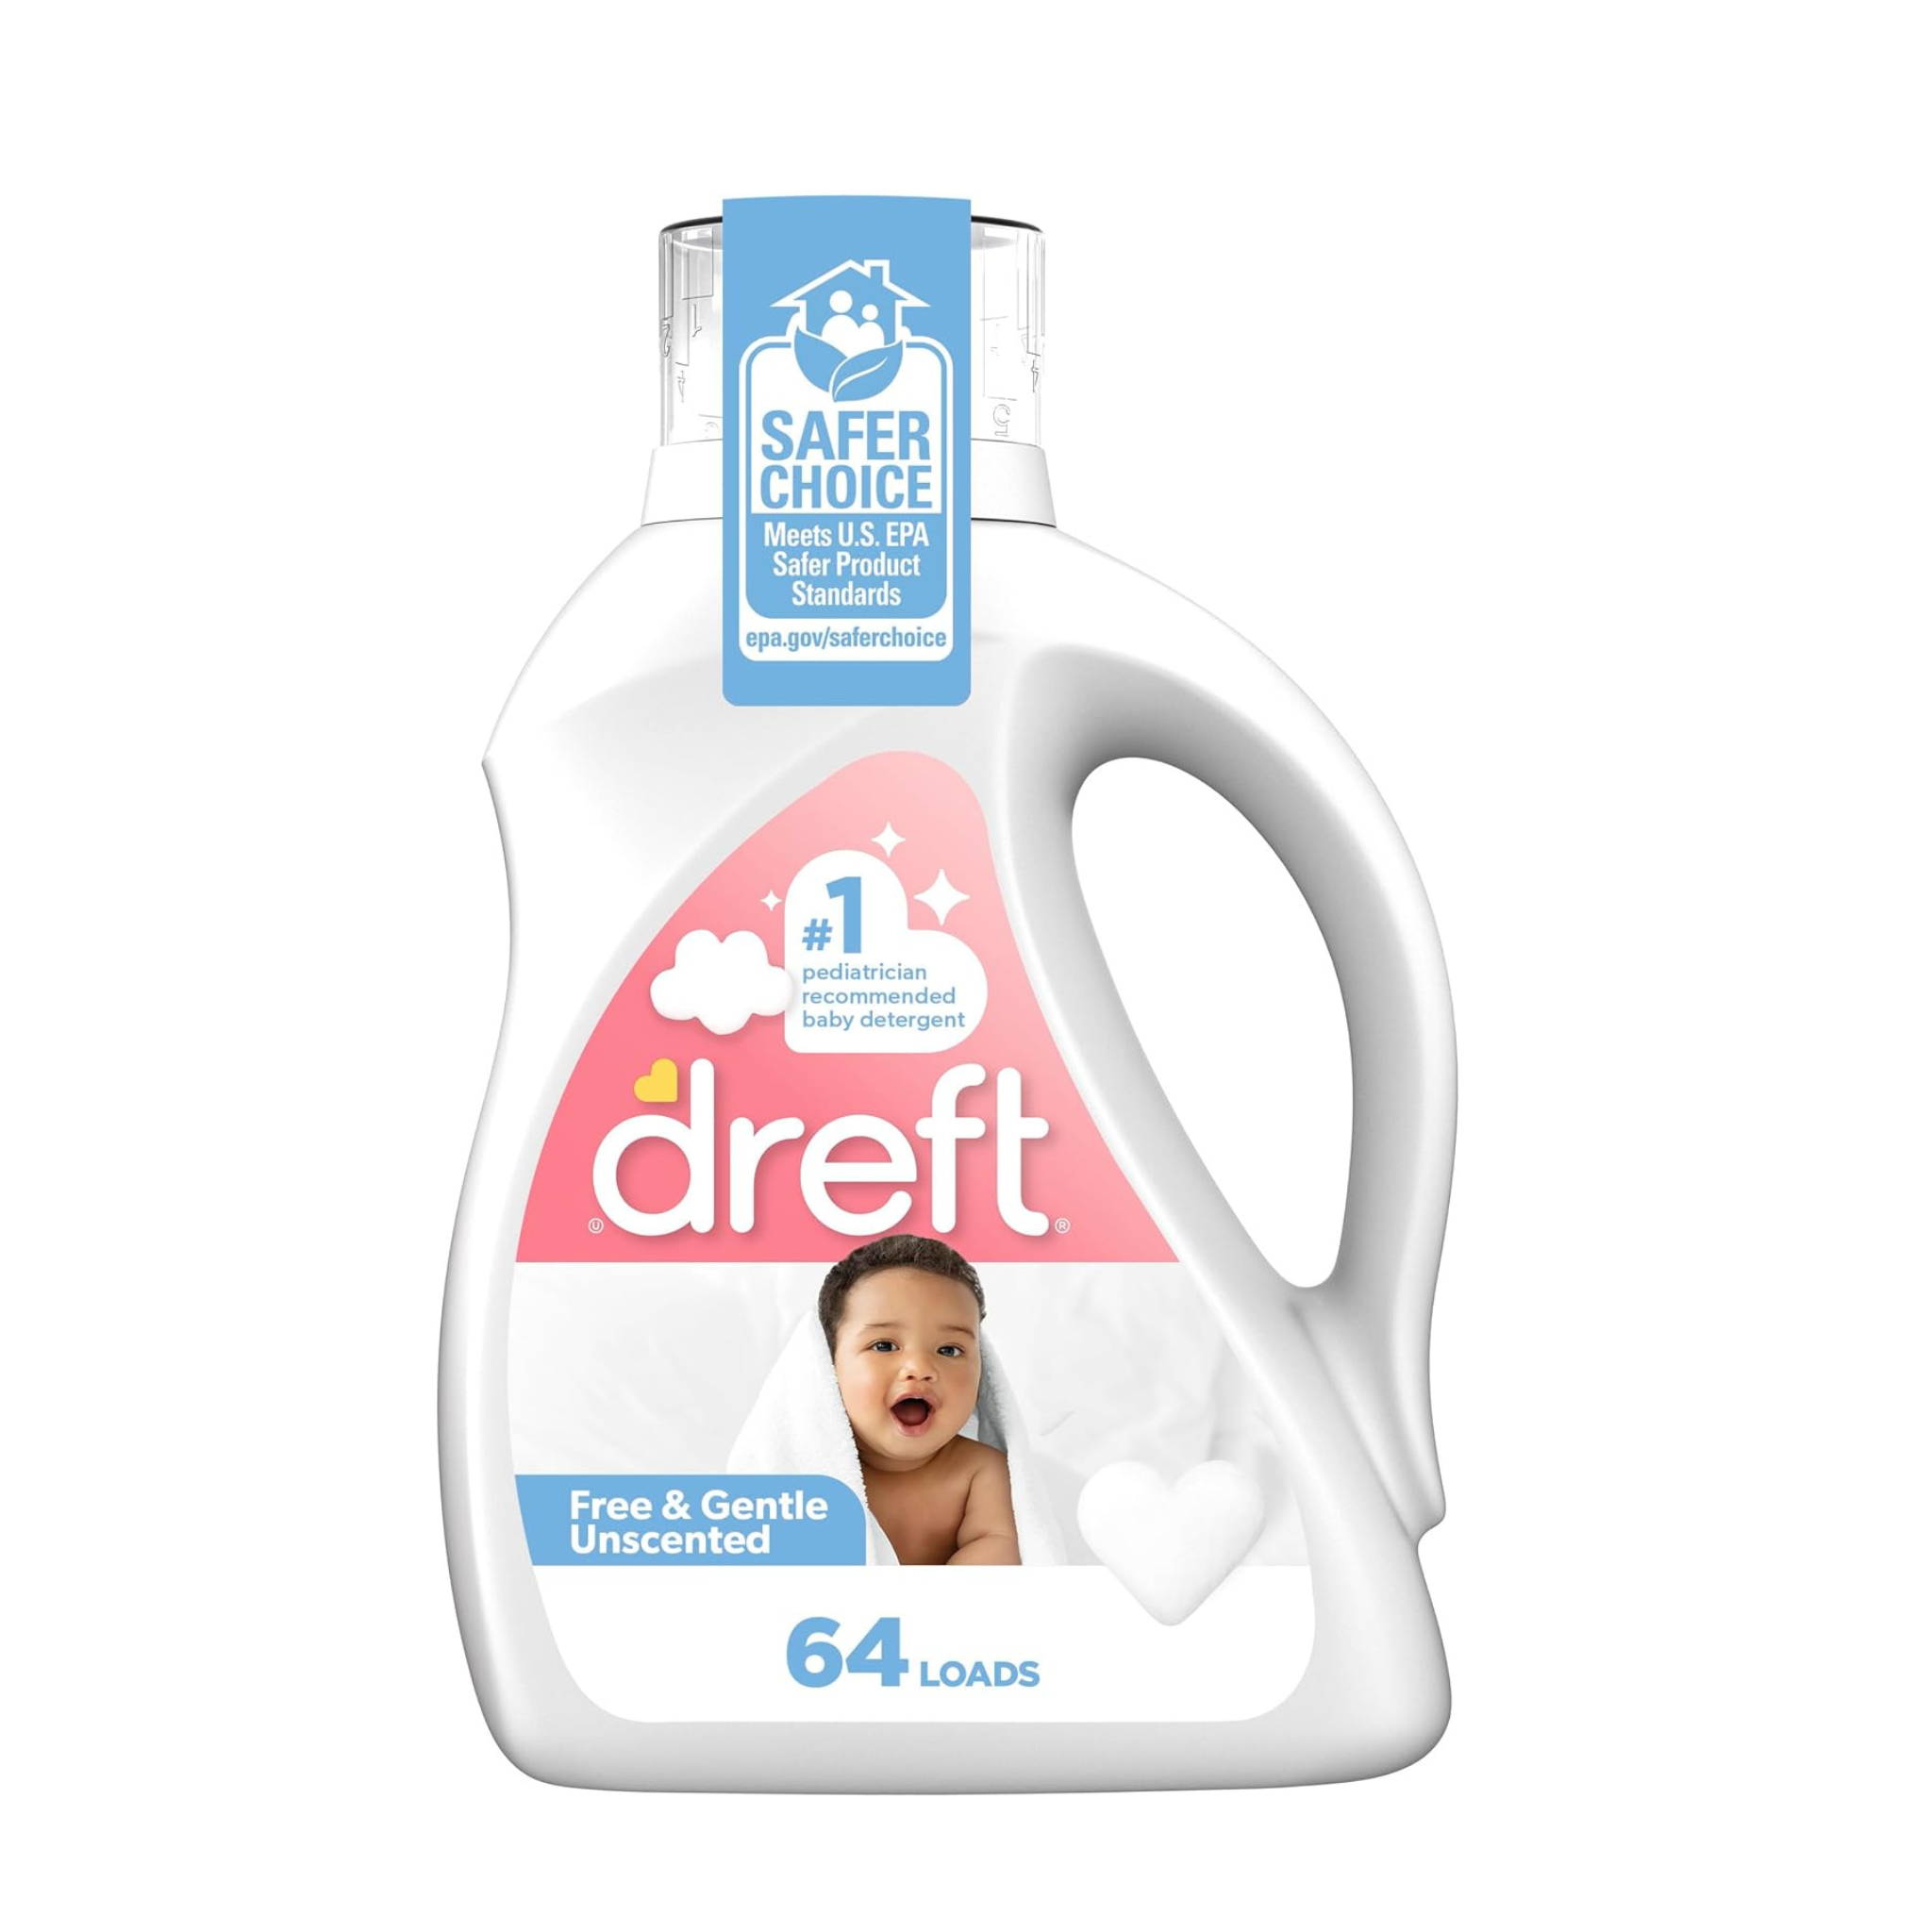 Dreft 64-Load Unscented Liquid Laundry Baby Detergent + Earn $12.50 Amazon Credit!